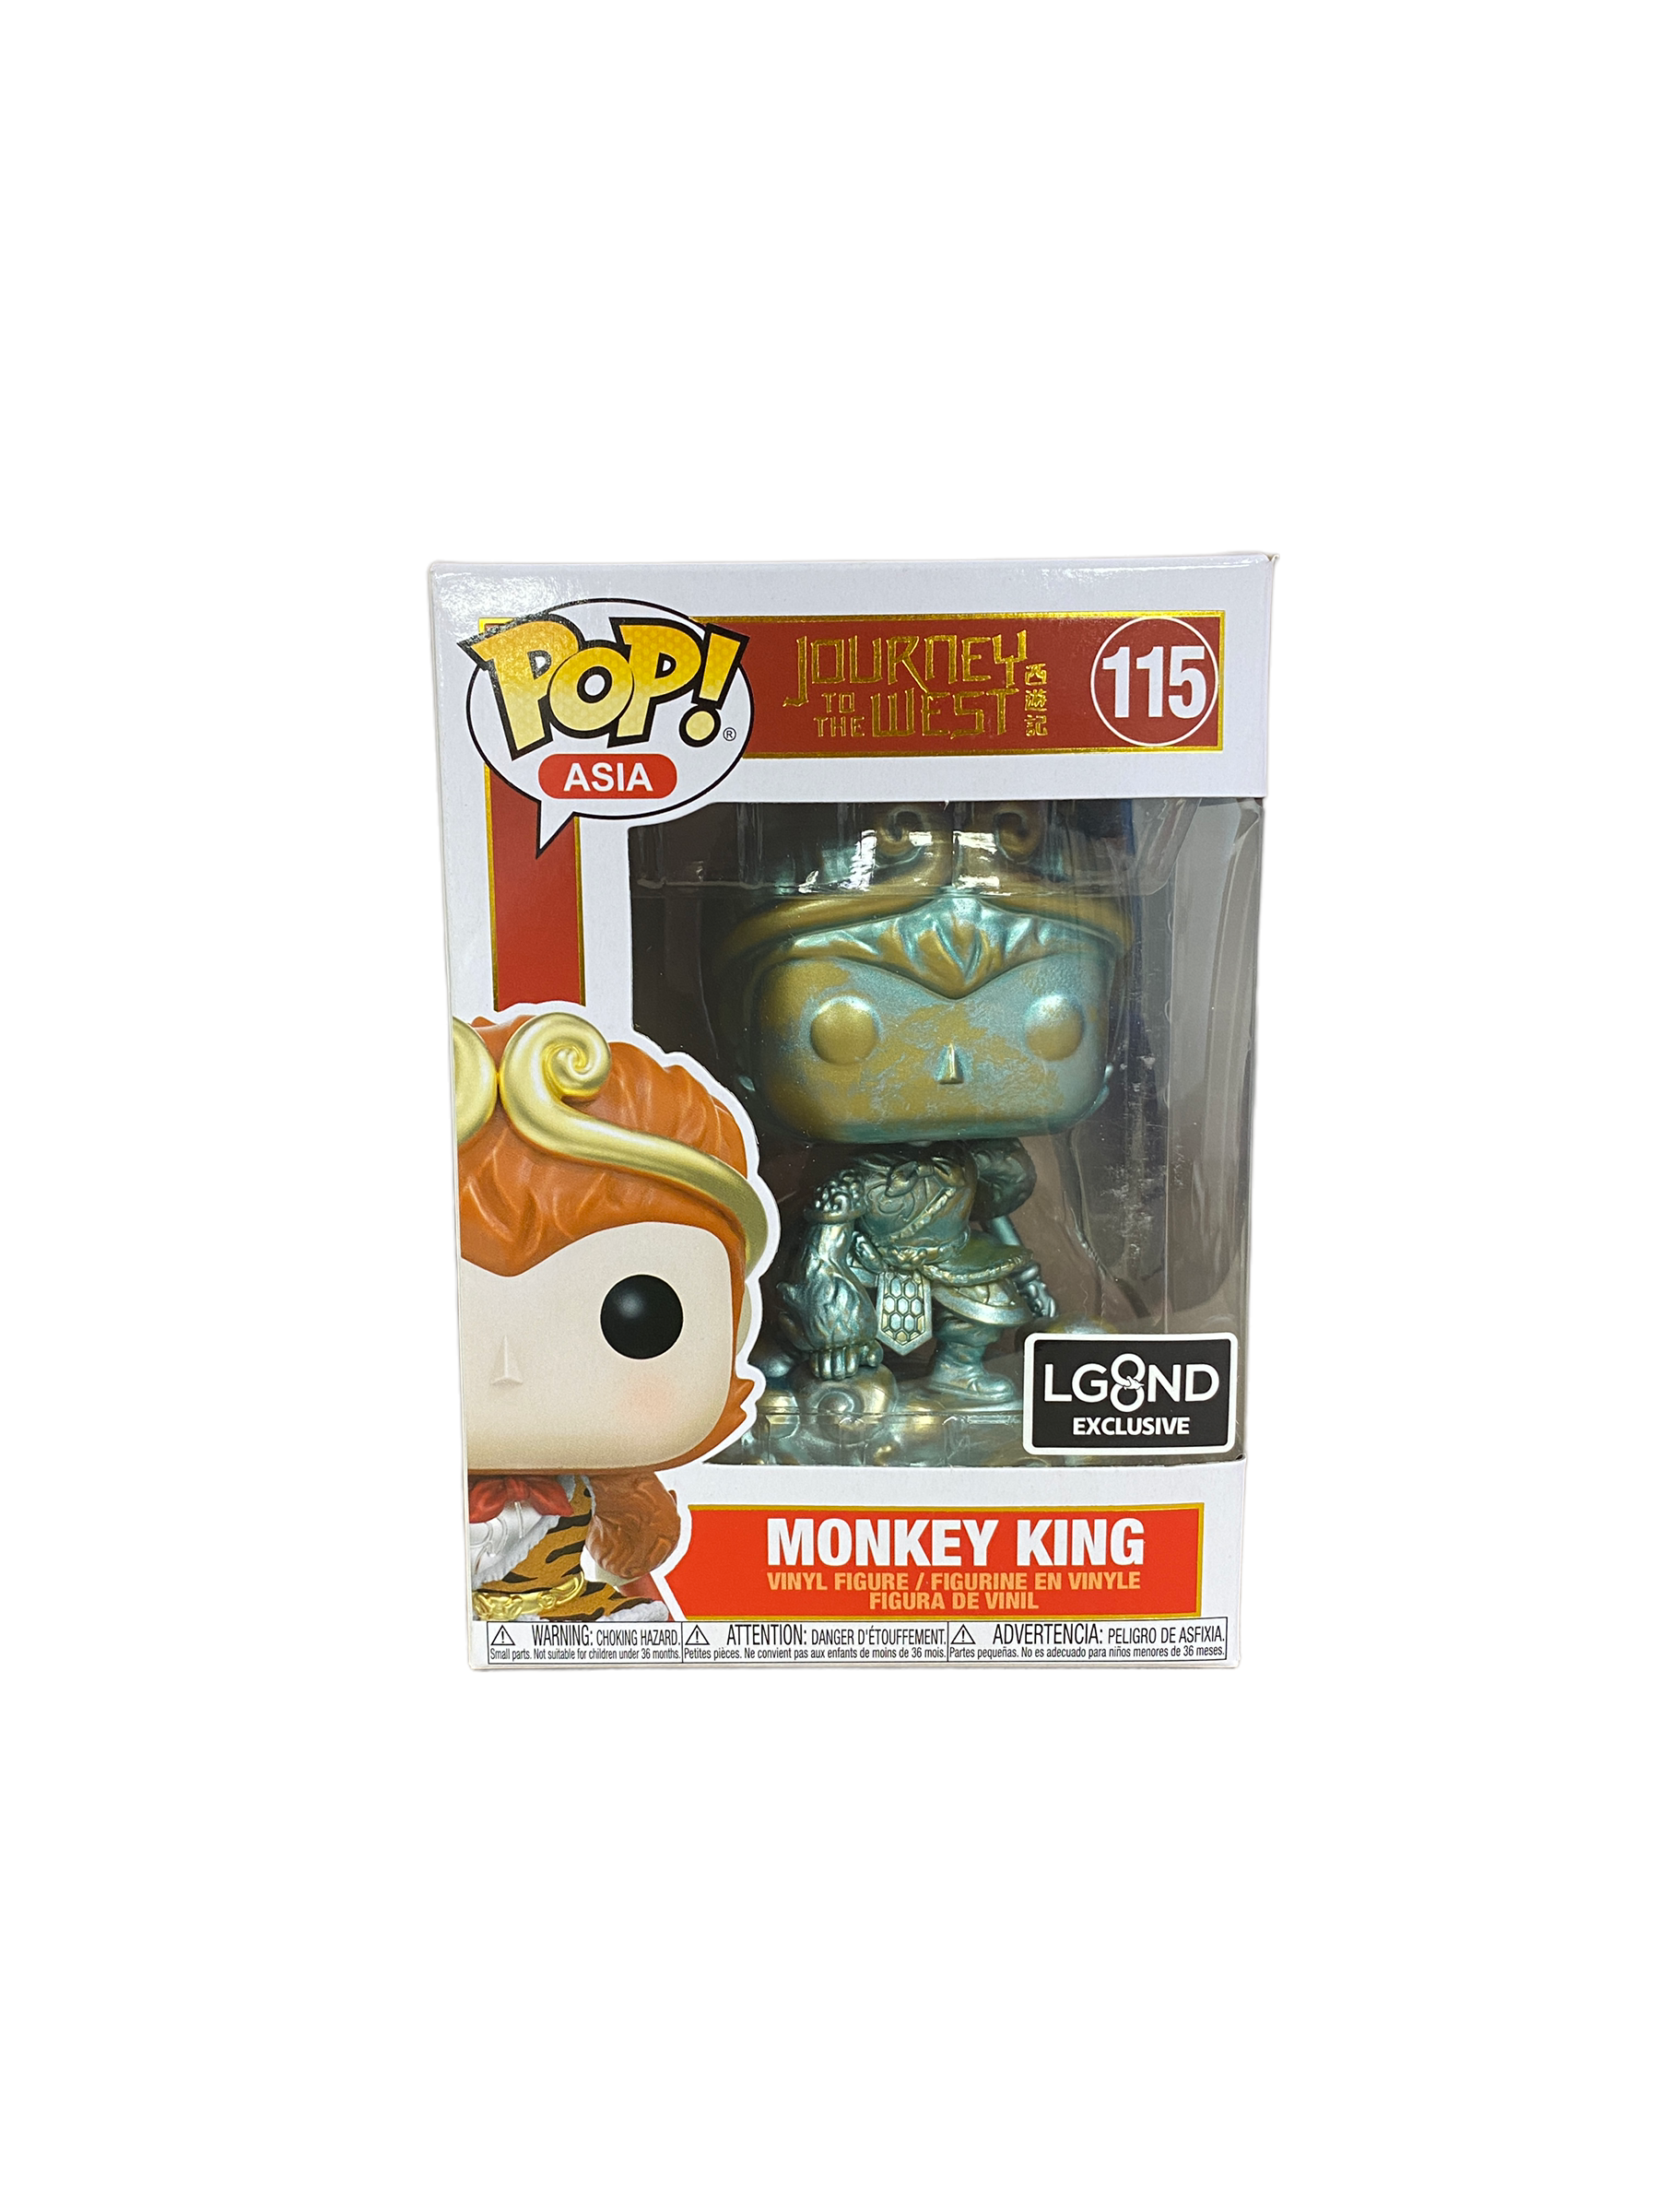 Monkey King #115 (Patina) Funko Pop! - Journey To The West - 2021 QTX QQ Toy Expo Exclusive - Condition 8.5/10